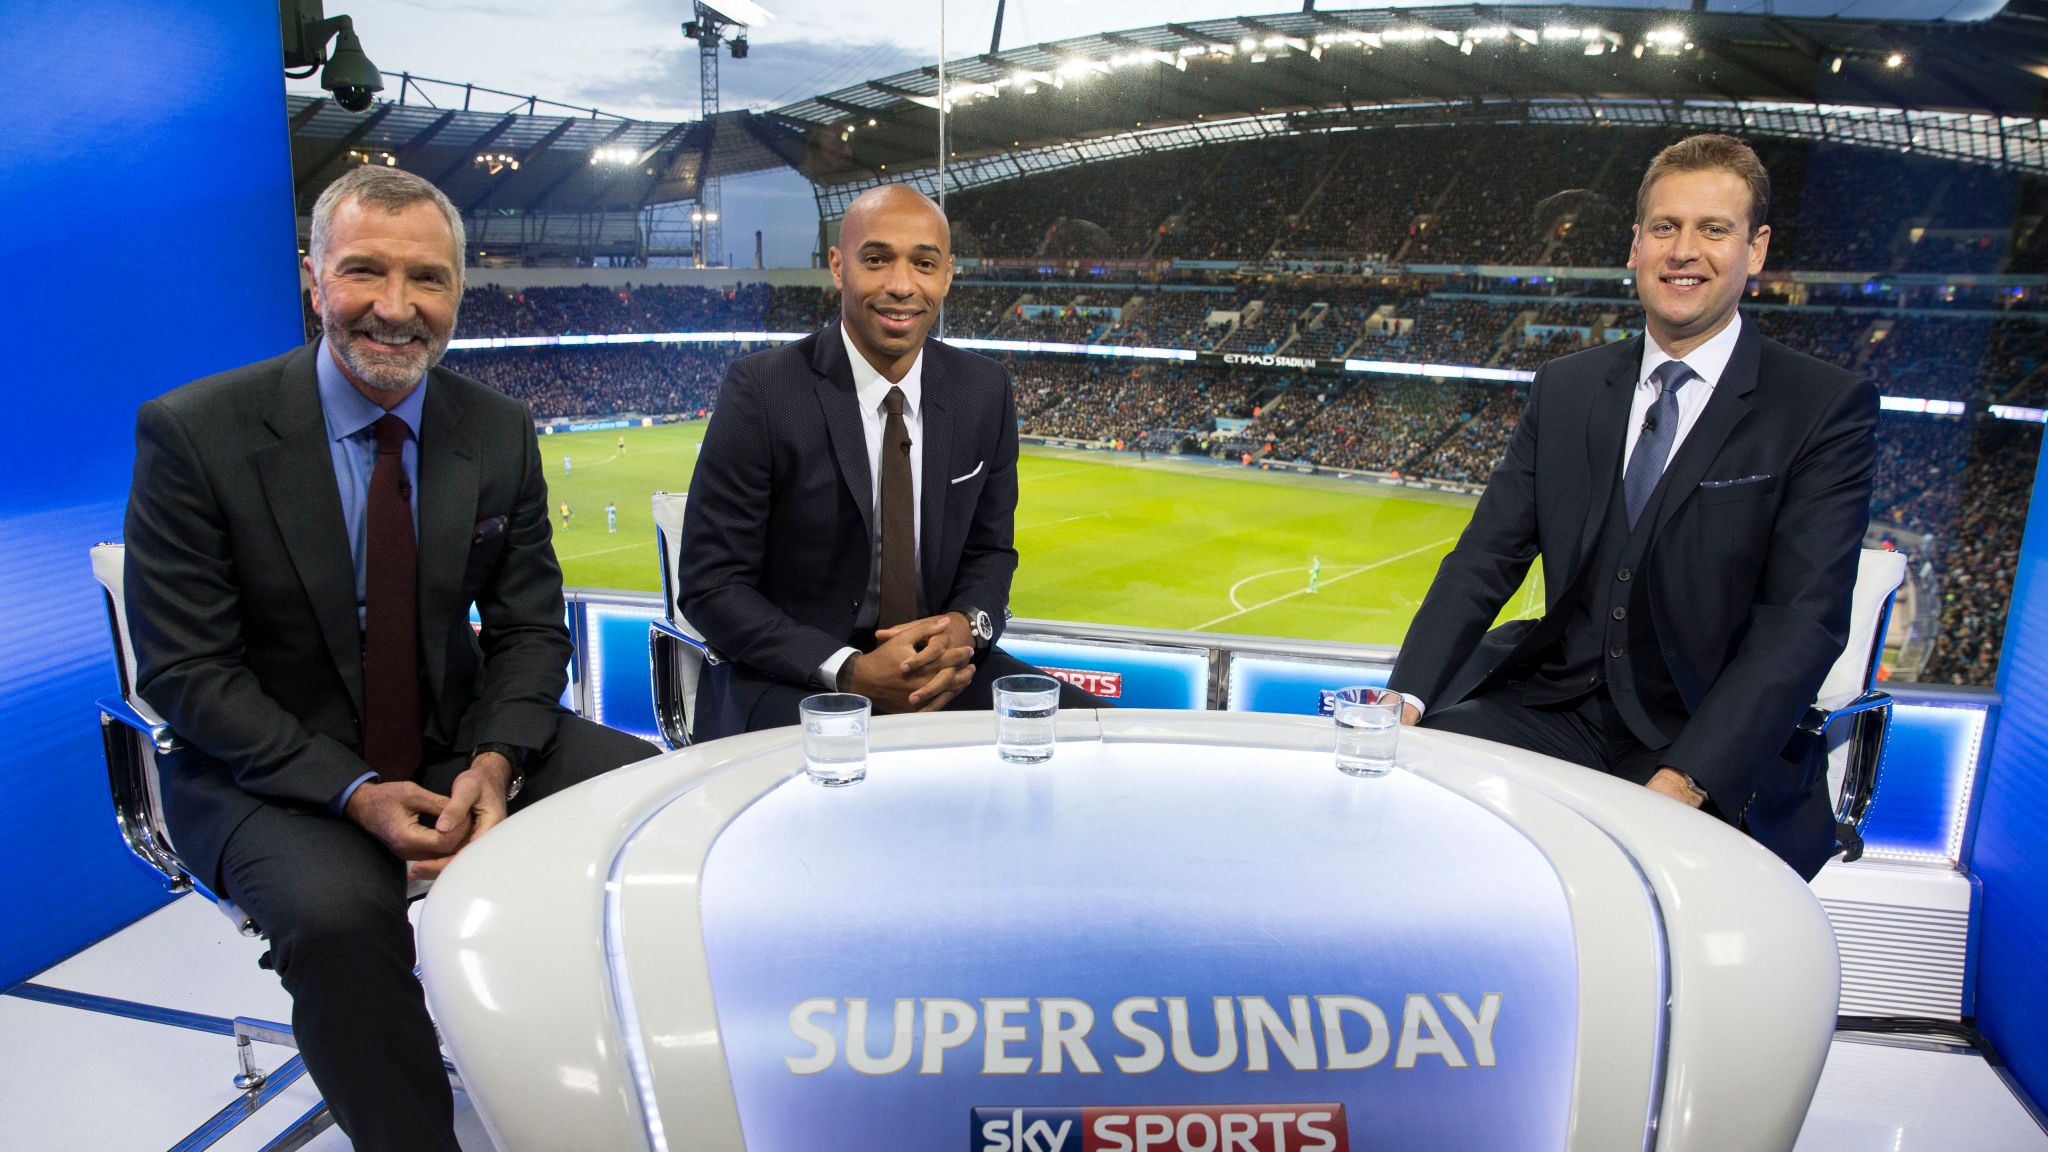 Sky Sports wins live Premier League rights to end of 201819 season